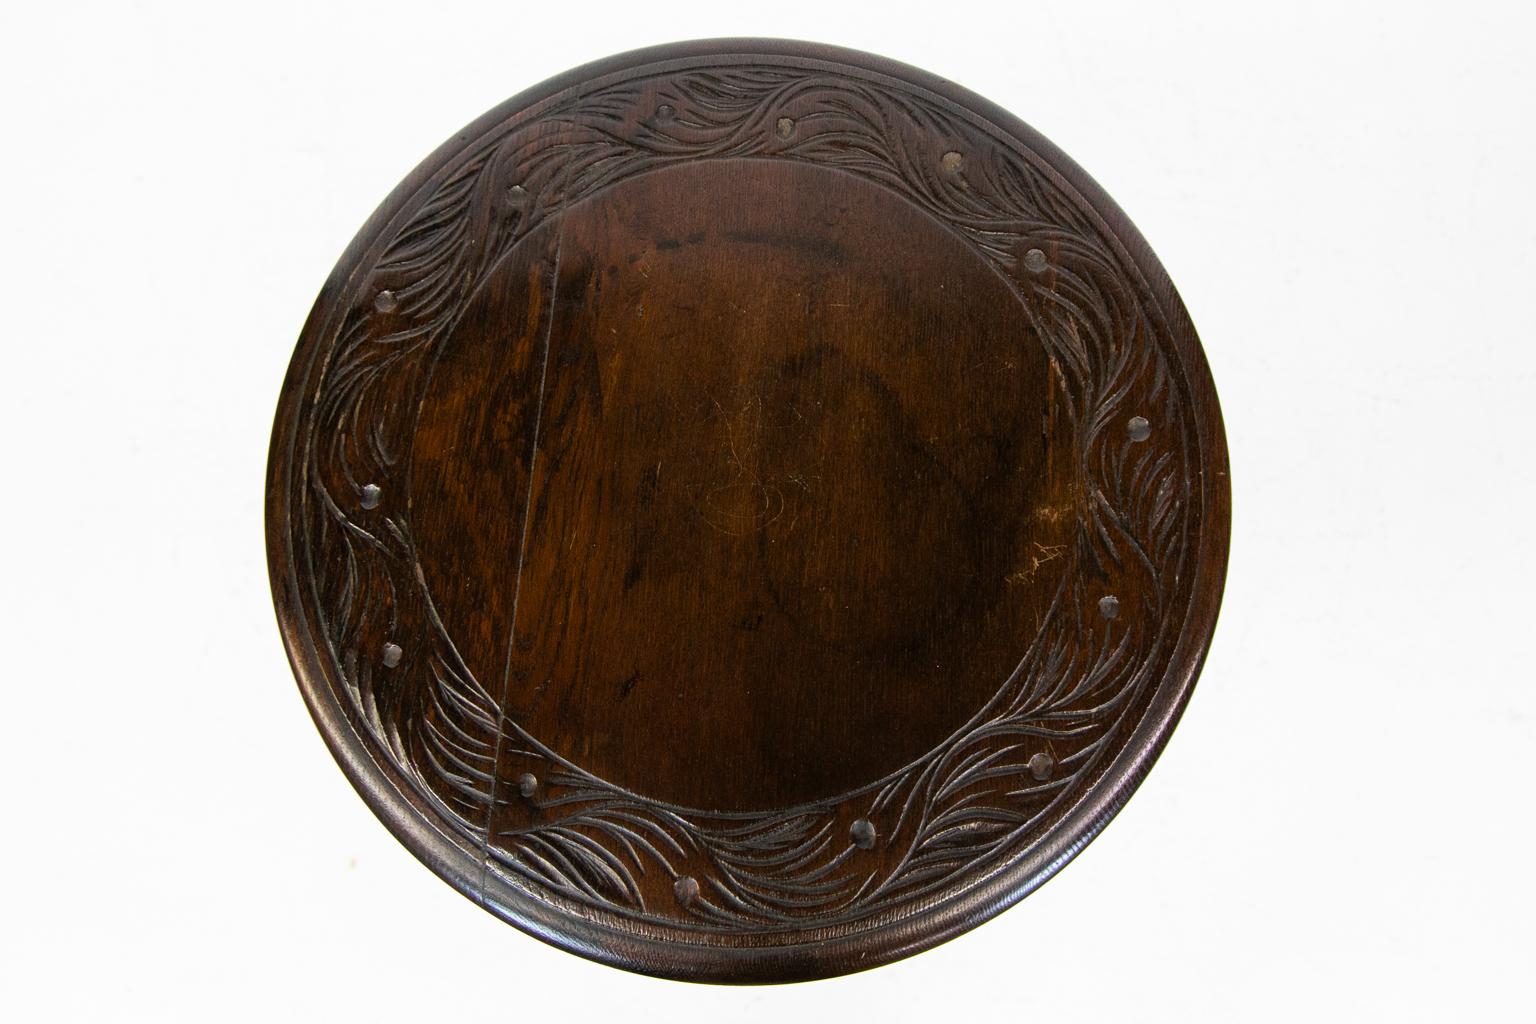 Carved oak occasional table has a repeating carved leaf band around a bull nose edge. The base has a carved and fluted center knop which rests on a carved trefoil platform base.